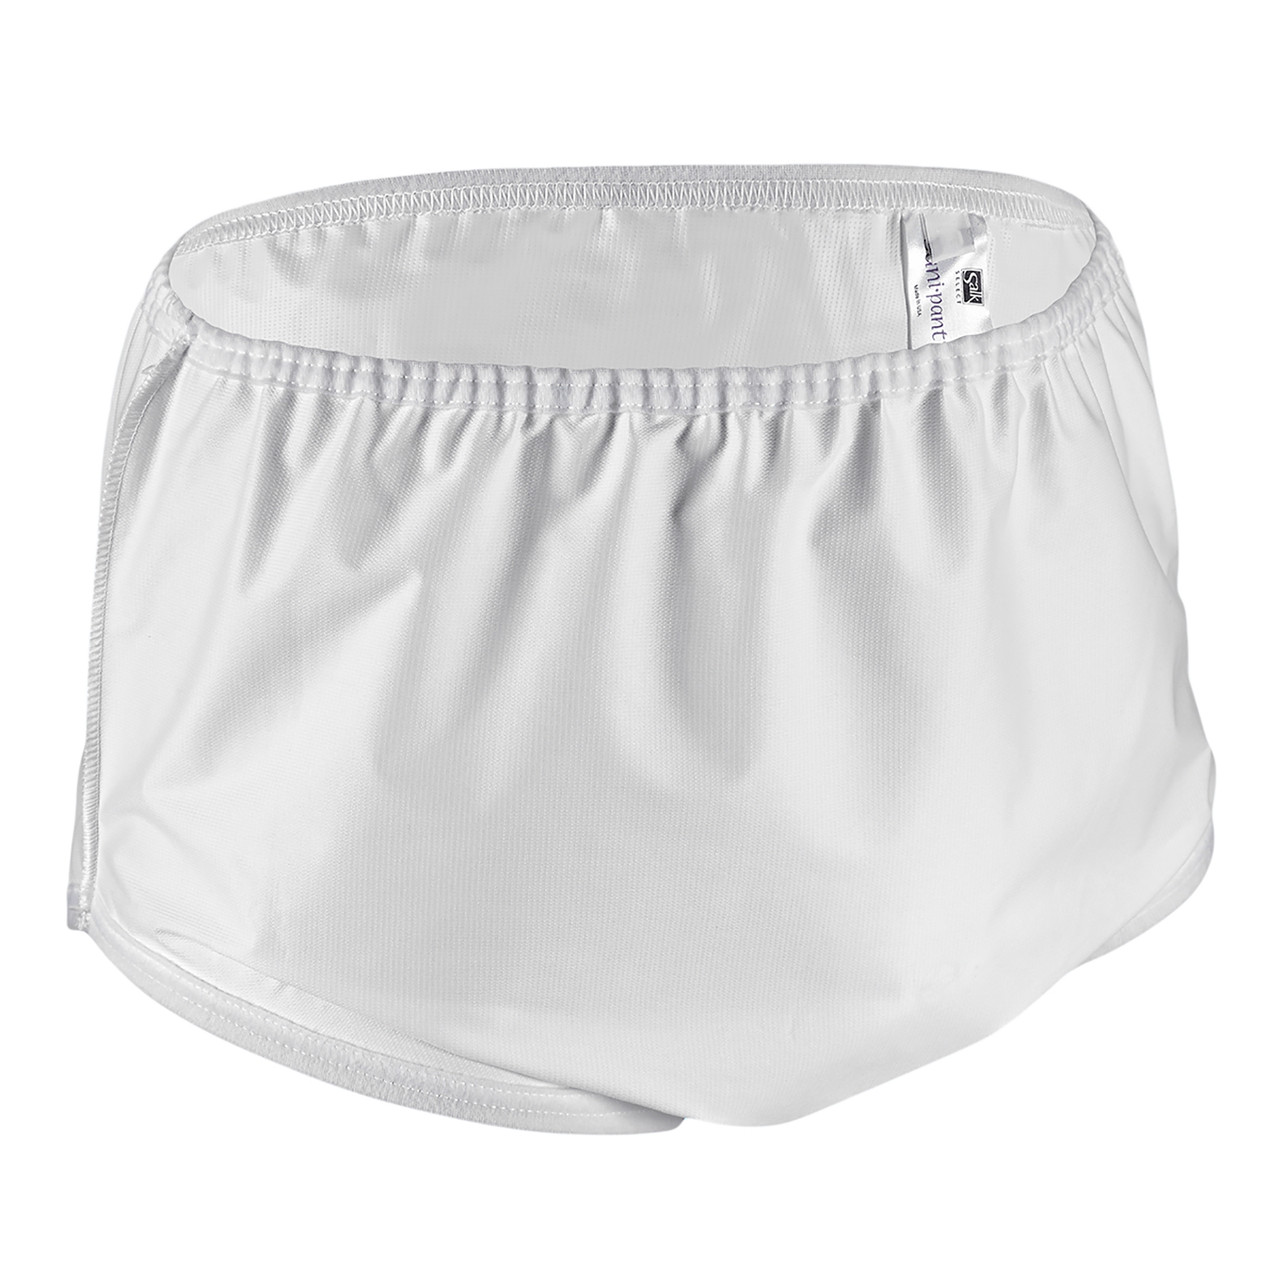 Incontinence Underpants Plastic Pull on Cover Pants Leak Proof Incontinence  Underwear Waterproof Adult Diaper Cover Incontinence Supplies Washable